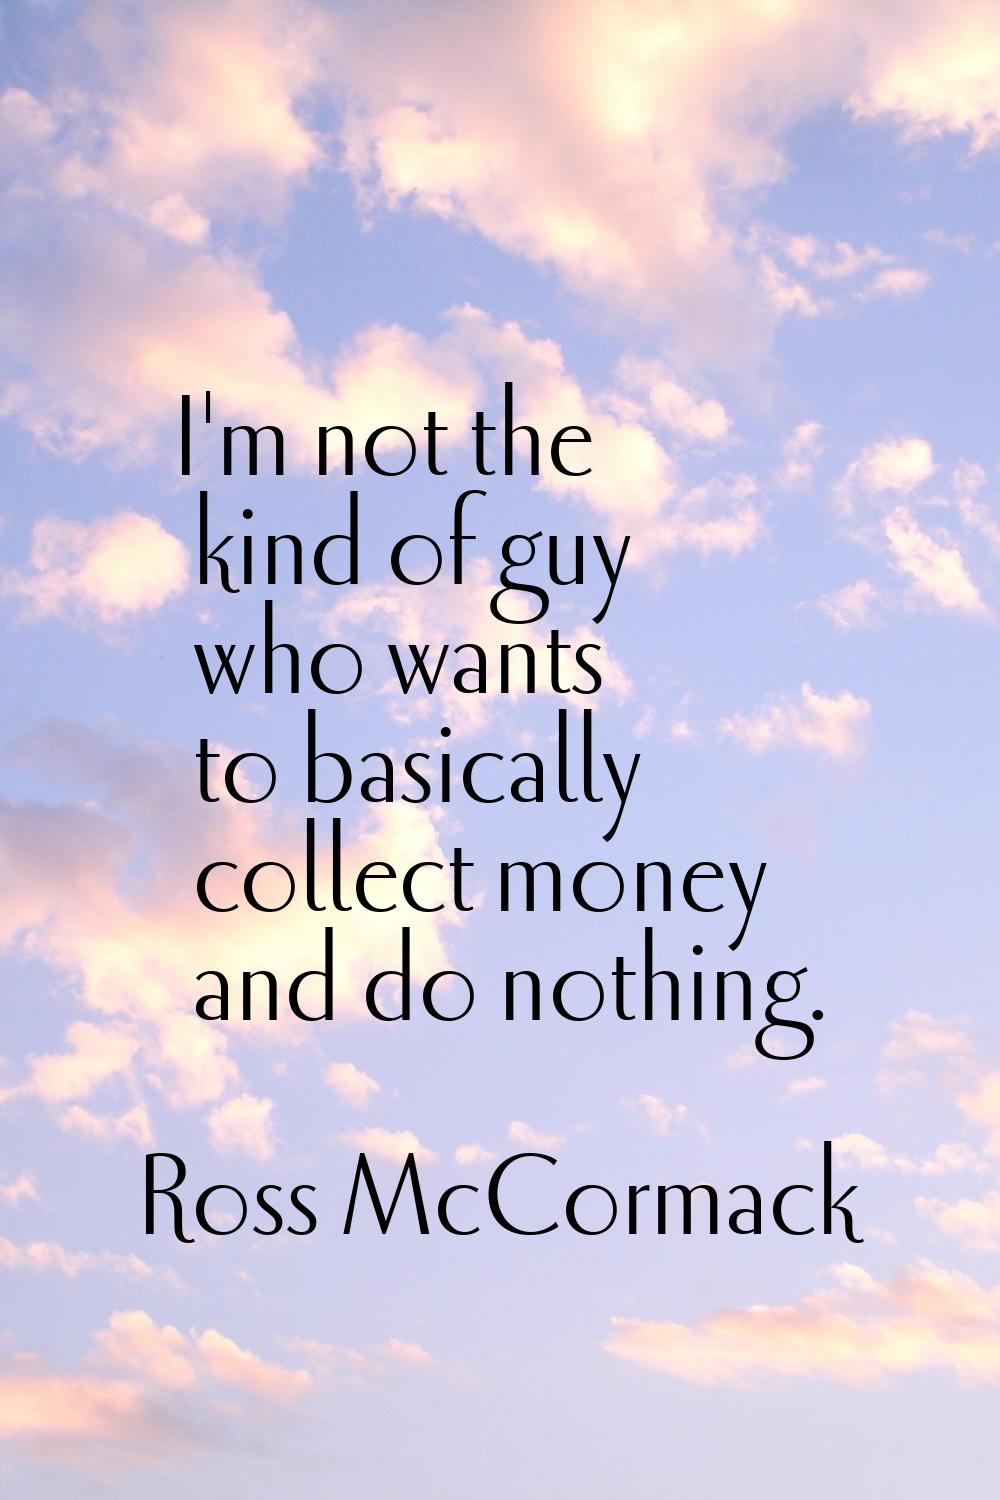 I'm not the kind of guy who wants to basically collect money and do nothing.